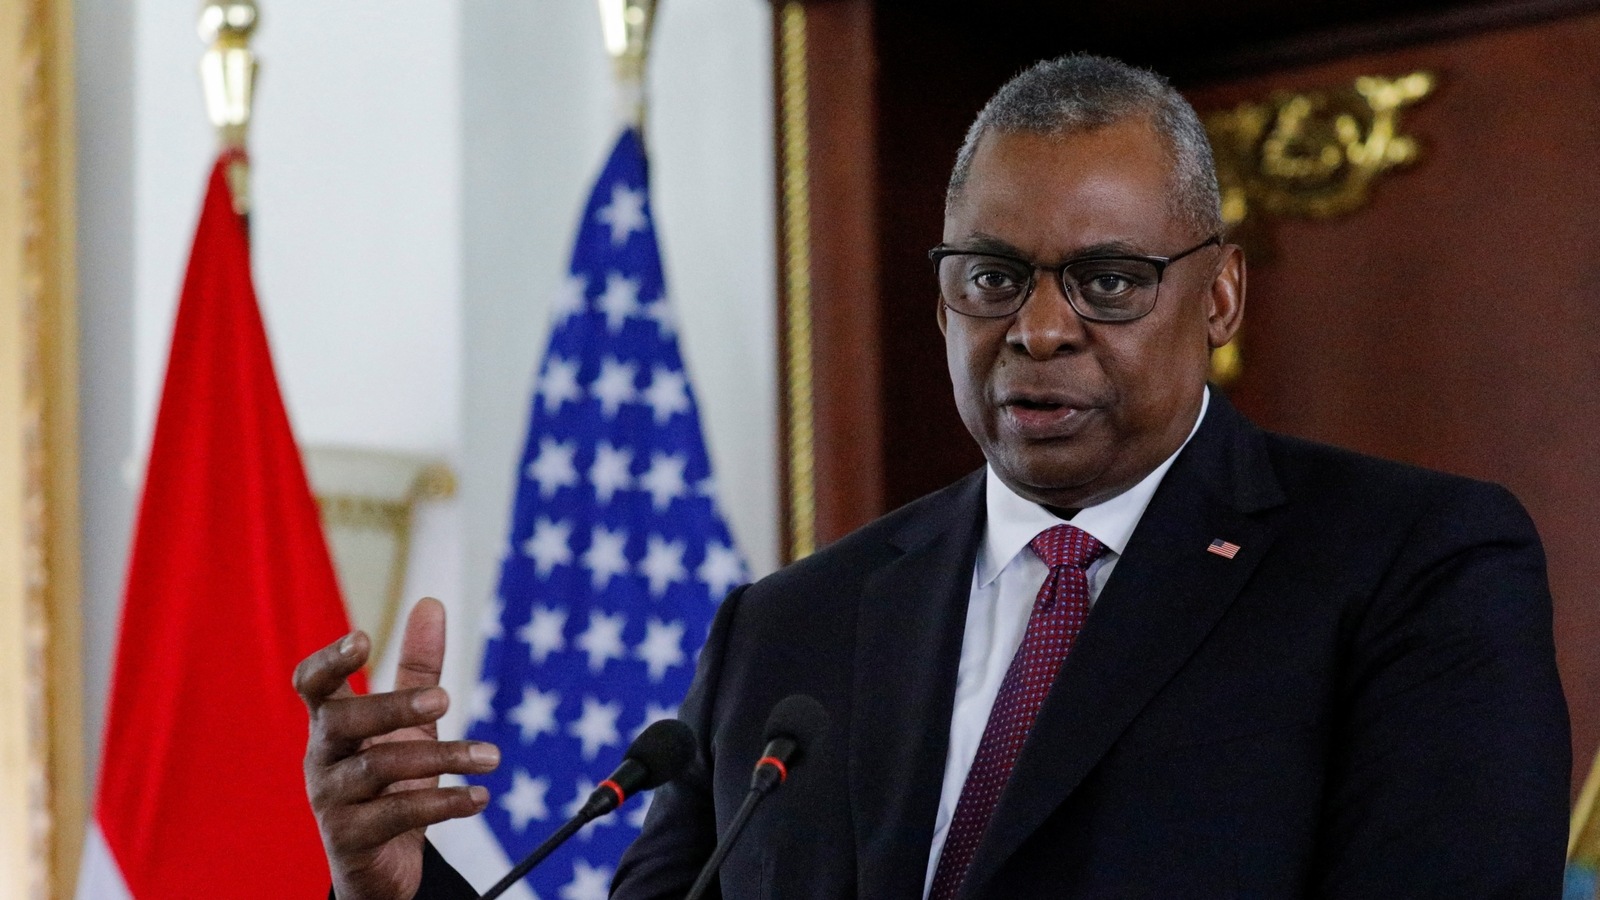 US committed to extended deterrence on North Korea: Lloyd Austin